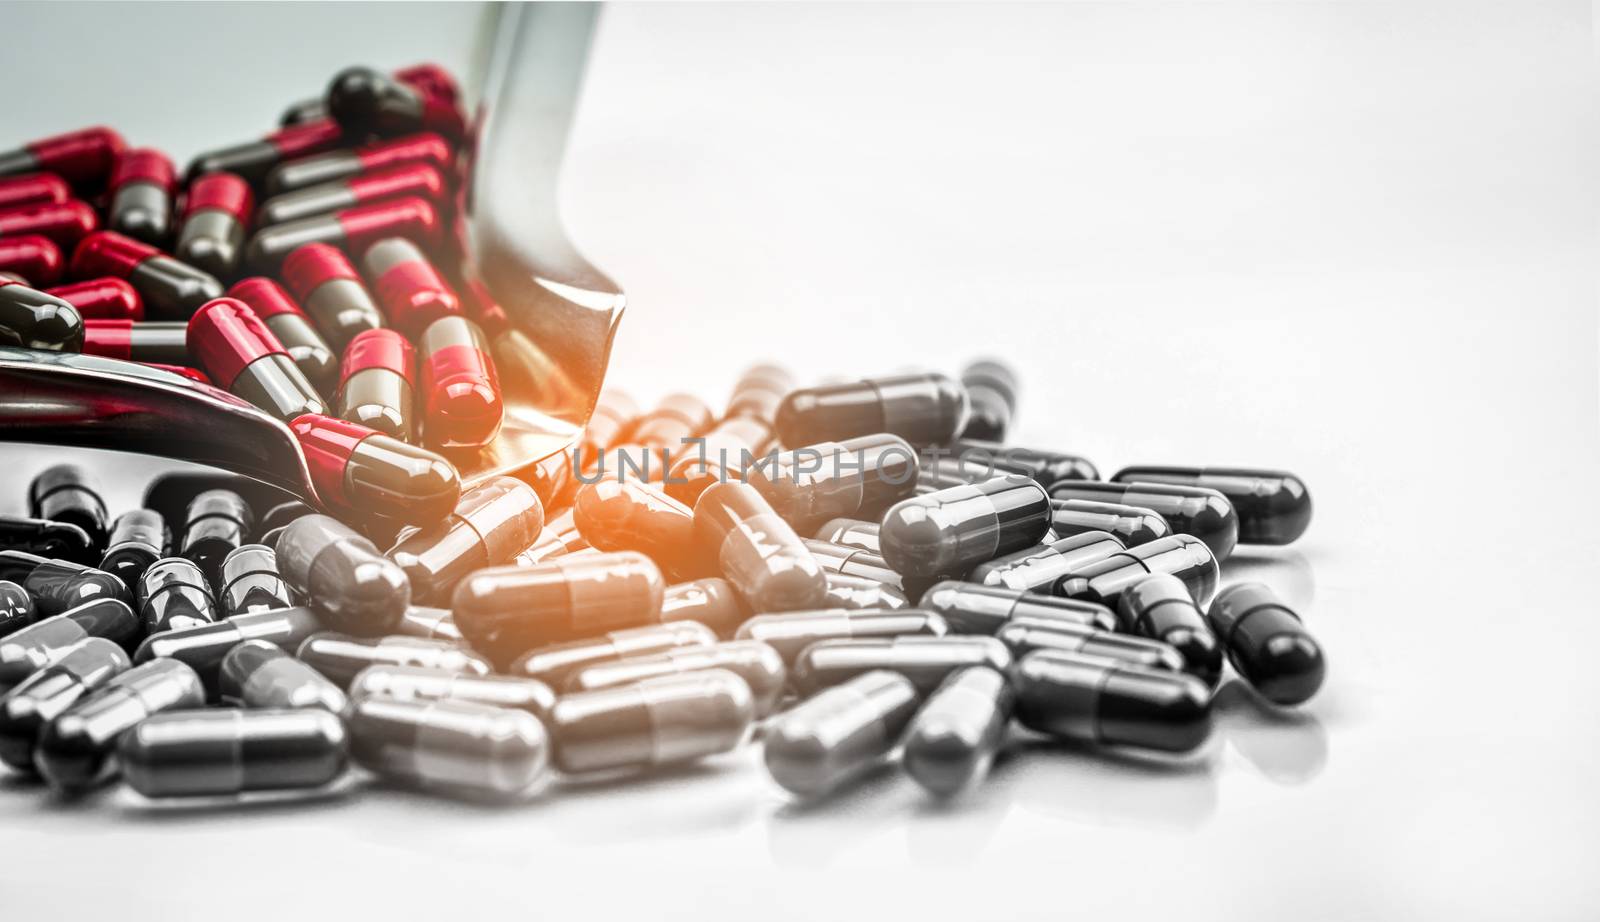 Red and grey capsule pills on stainless steel drug tray and gray capsules on white background. Migraine prophylaxis treatment concept. Global healthcare concept. Pharmaceutical industry. by Fahroni